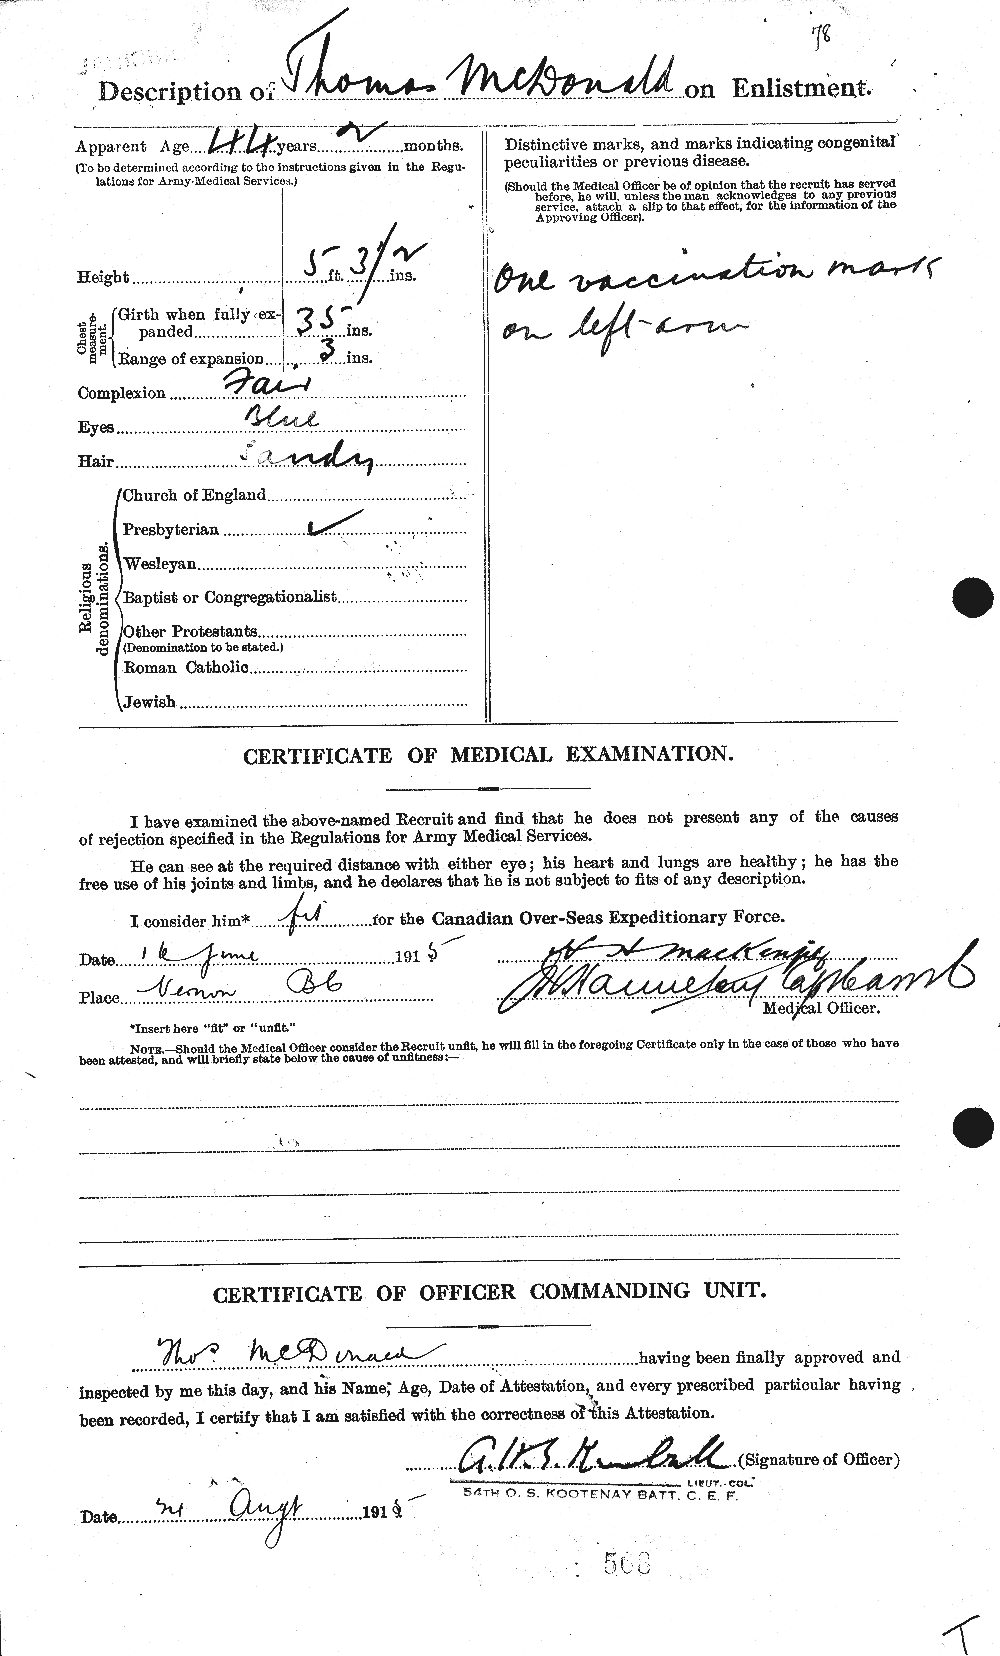 Personnel Records of the First World War - CEF 519812b